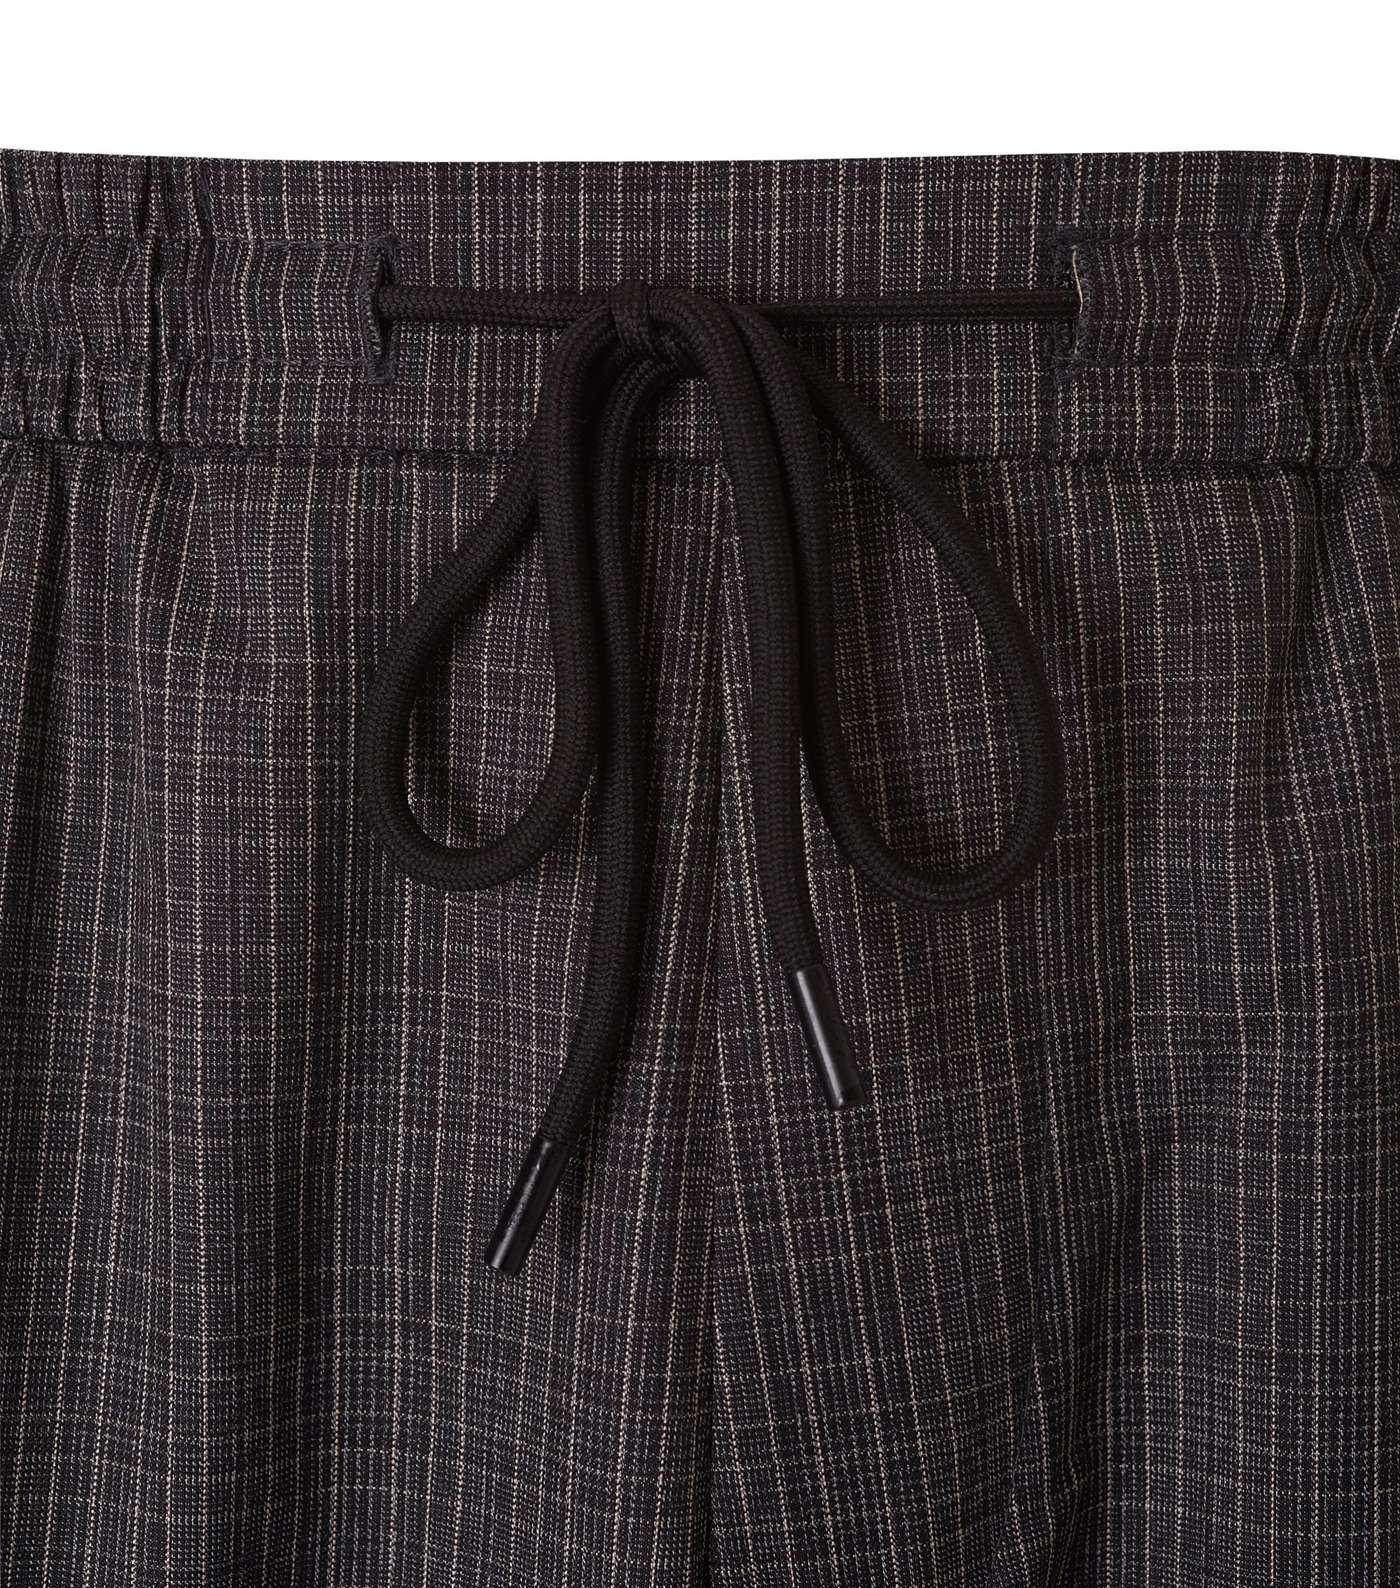 Plus Size Dark Grey Check Pull On Trousers Image 3